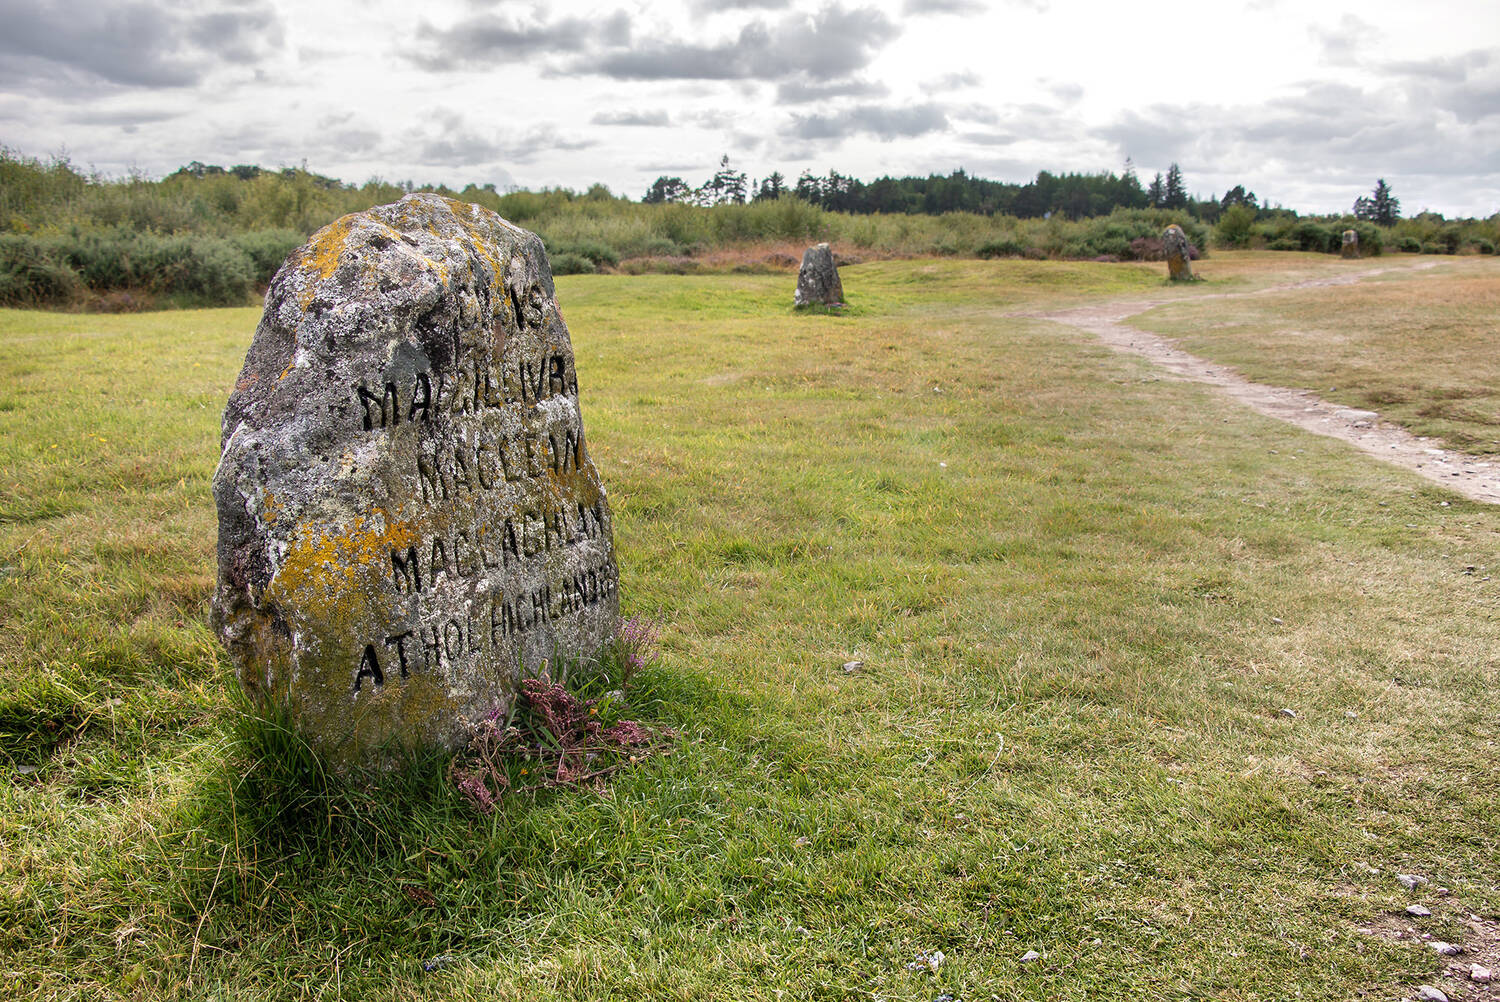 A gravestone stands beside a path on Culloden moor. The stone has lichen growing on it.